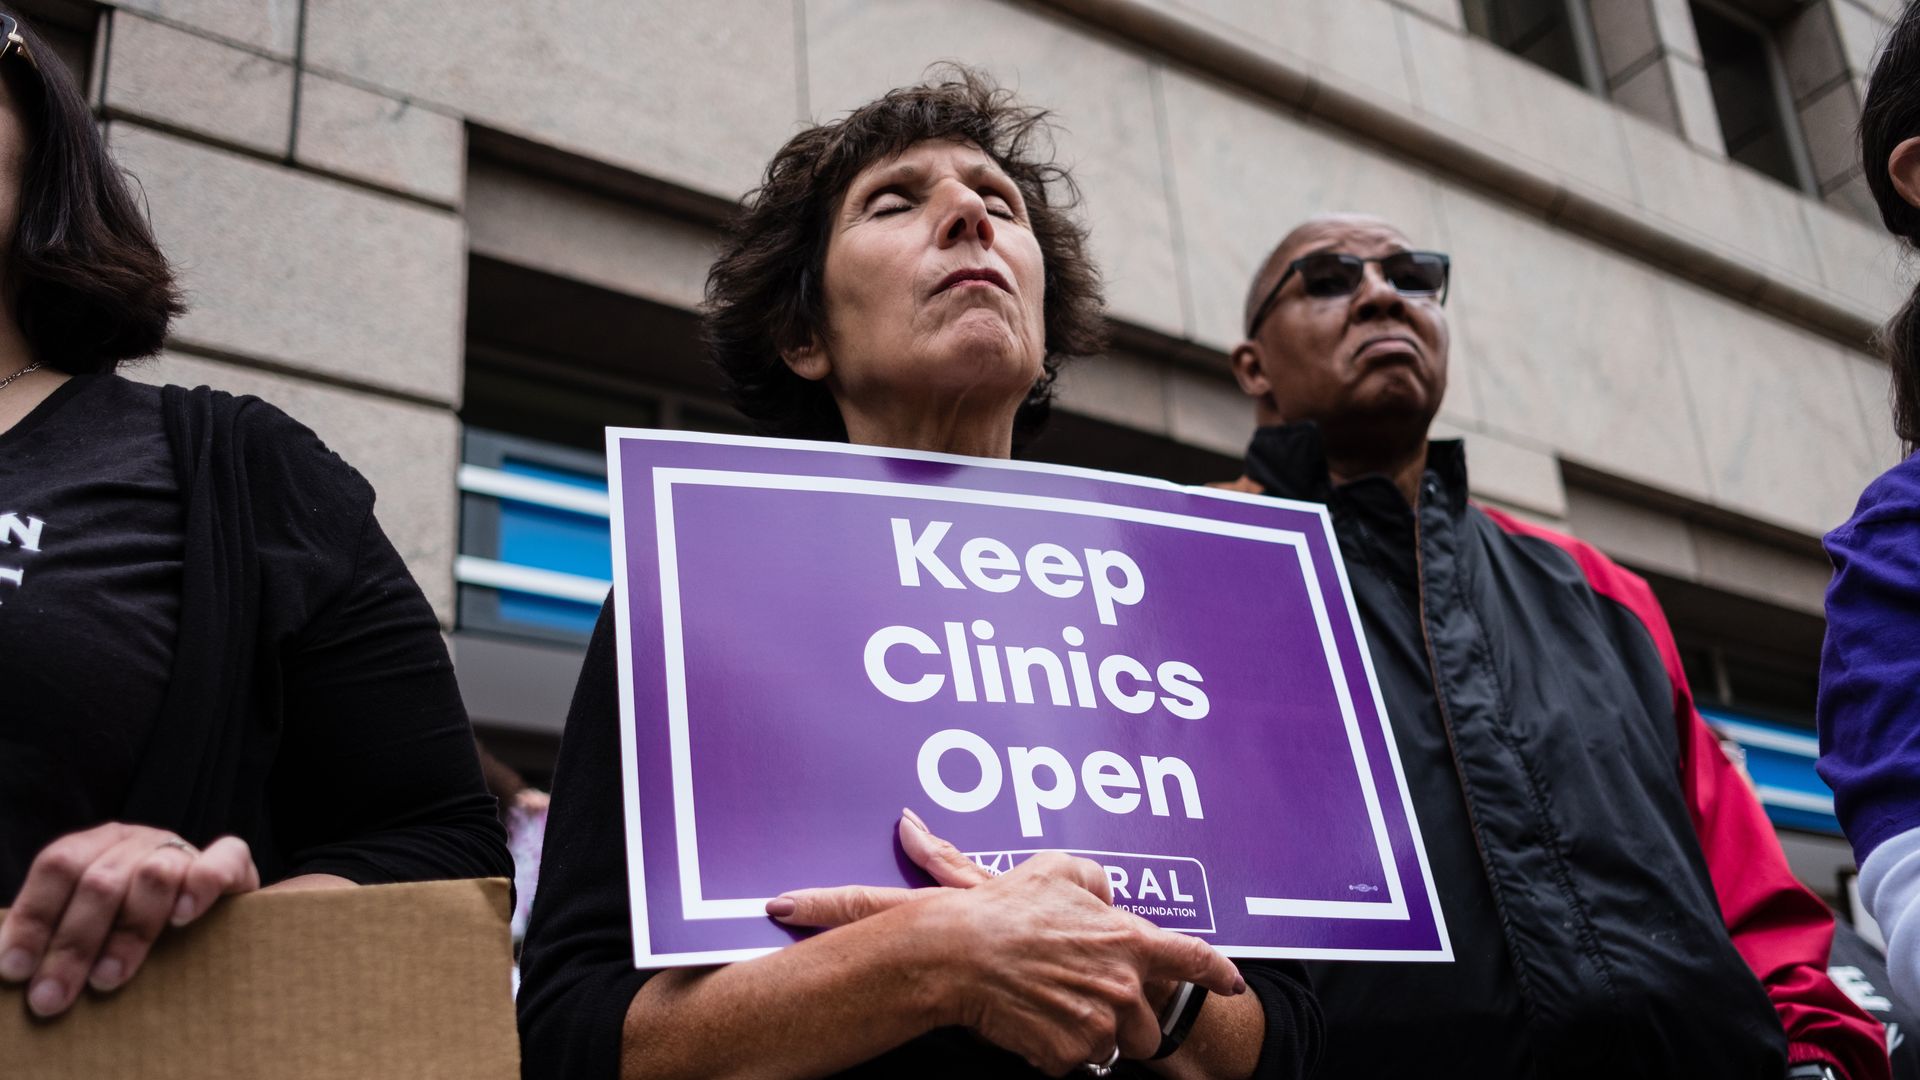 Photo of a protester holding a sign that says "Keep clinics open" 